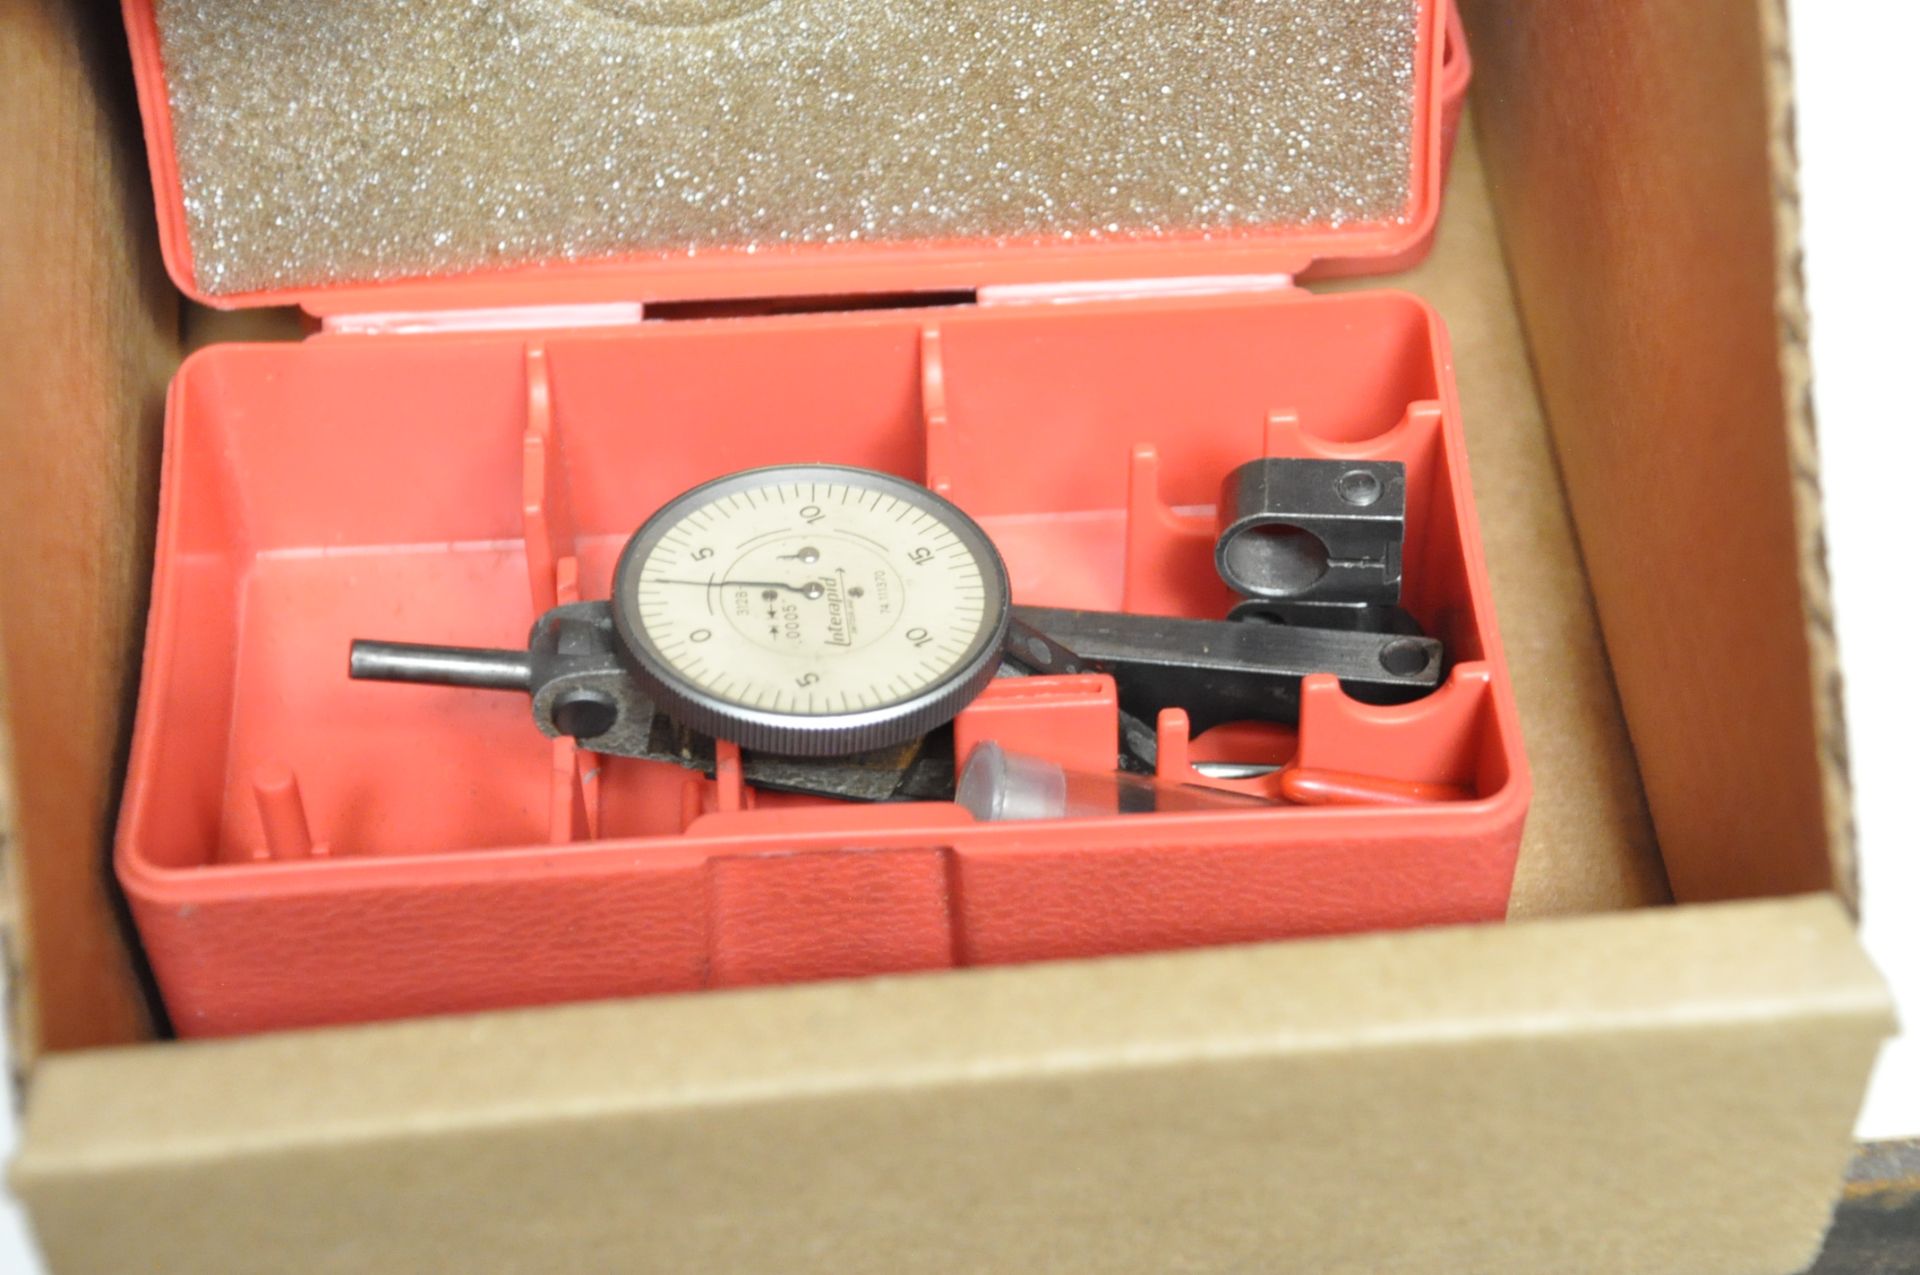 Lot-(3) Various Dial Force Indicator Gauges in (1) Box - Image 2 of 4